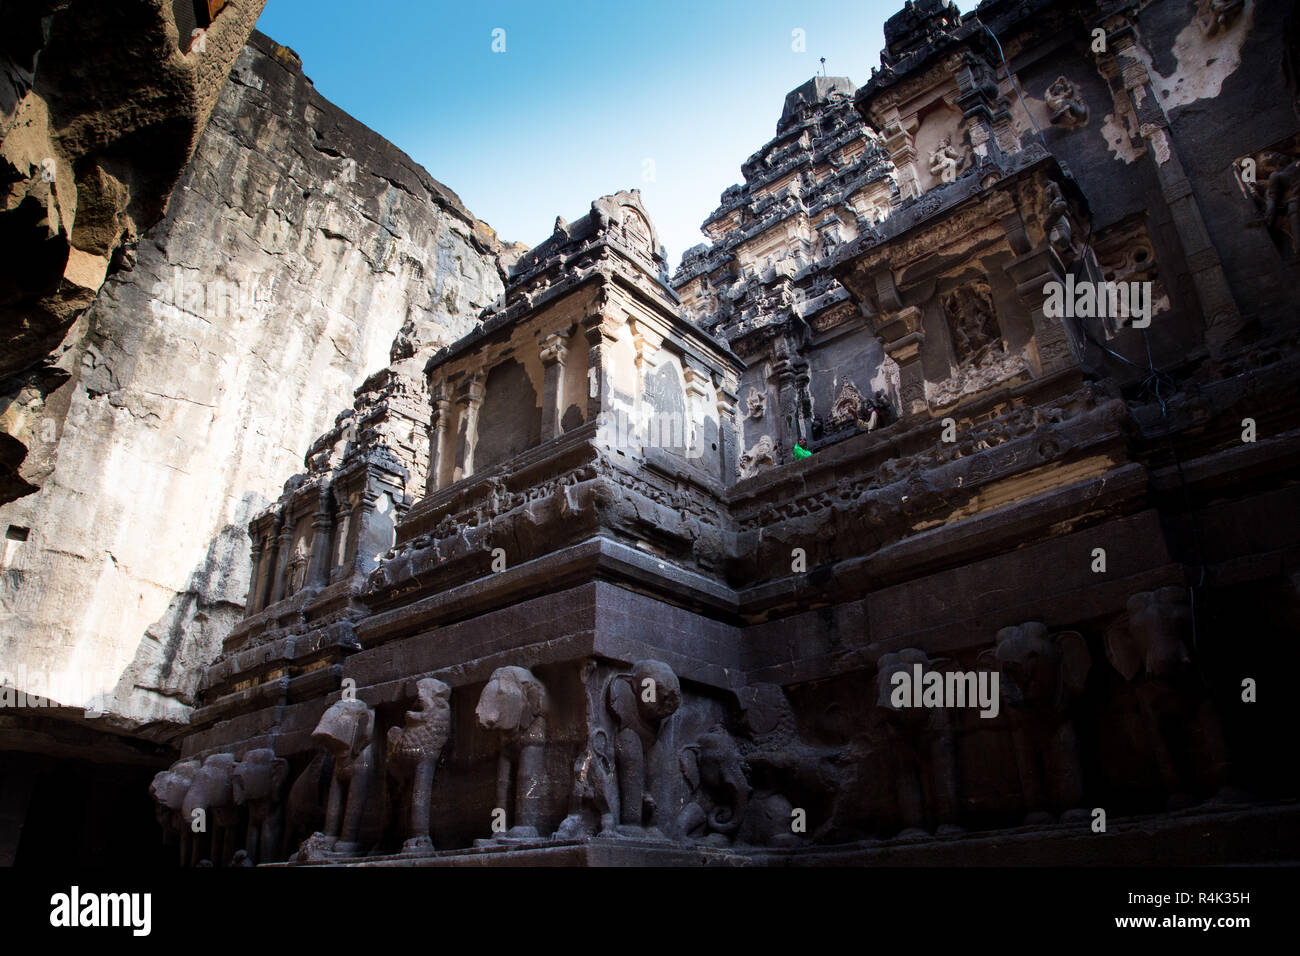 Ellora caves rock-cut monastery-temple cave complexes UNESCO World Heritage Site, featuring Buddhist, Hindu and Jain monument Stock Photo